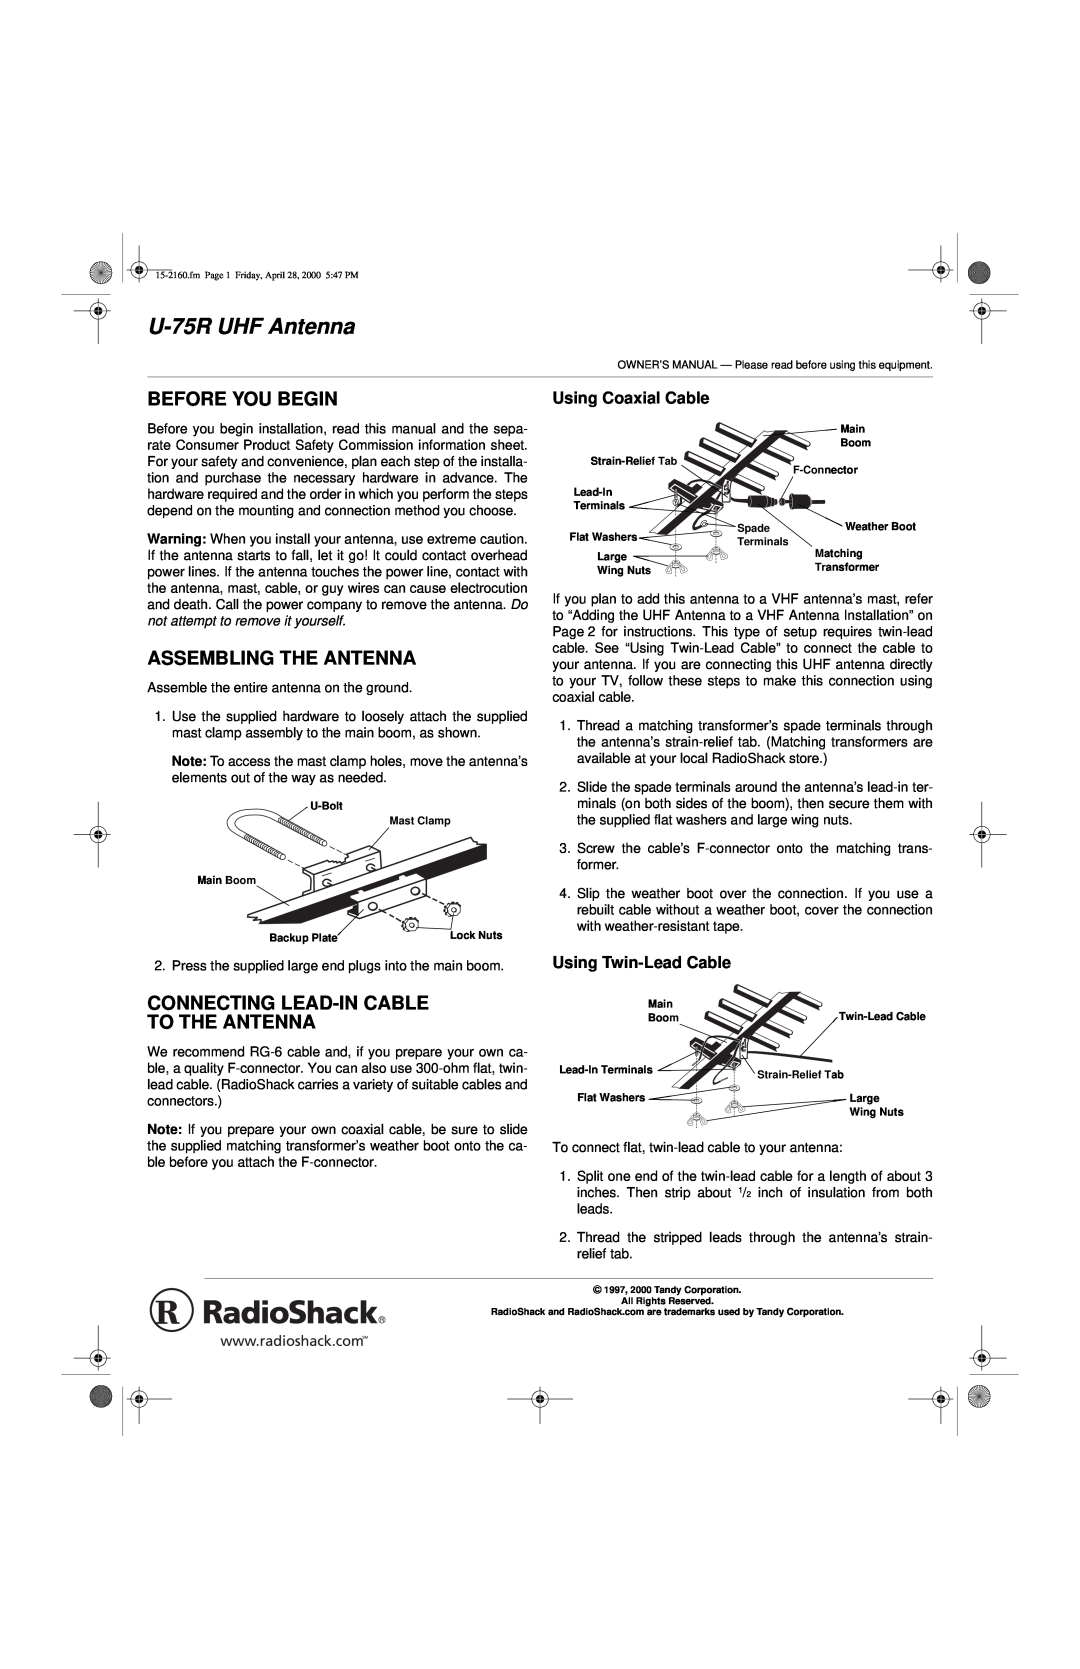 Roberts Radio U-75R owner manual Before You Begin, Assembling The Antenna, Connecting Lead-In Cable To The Antenna 